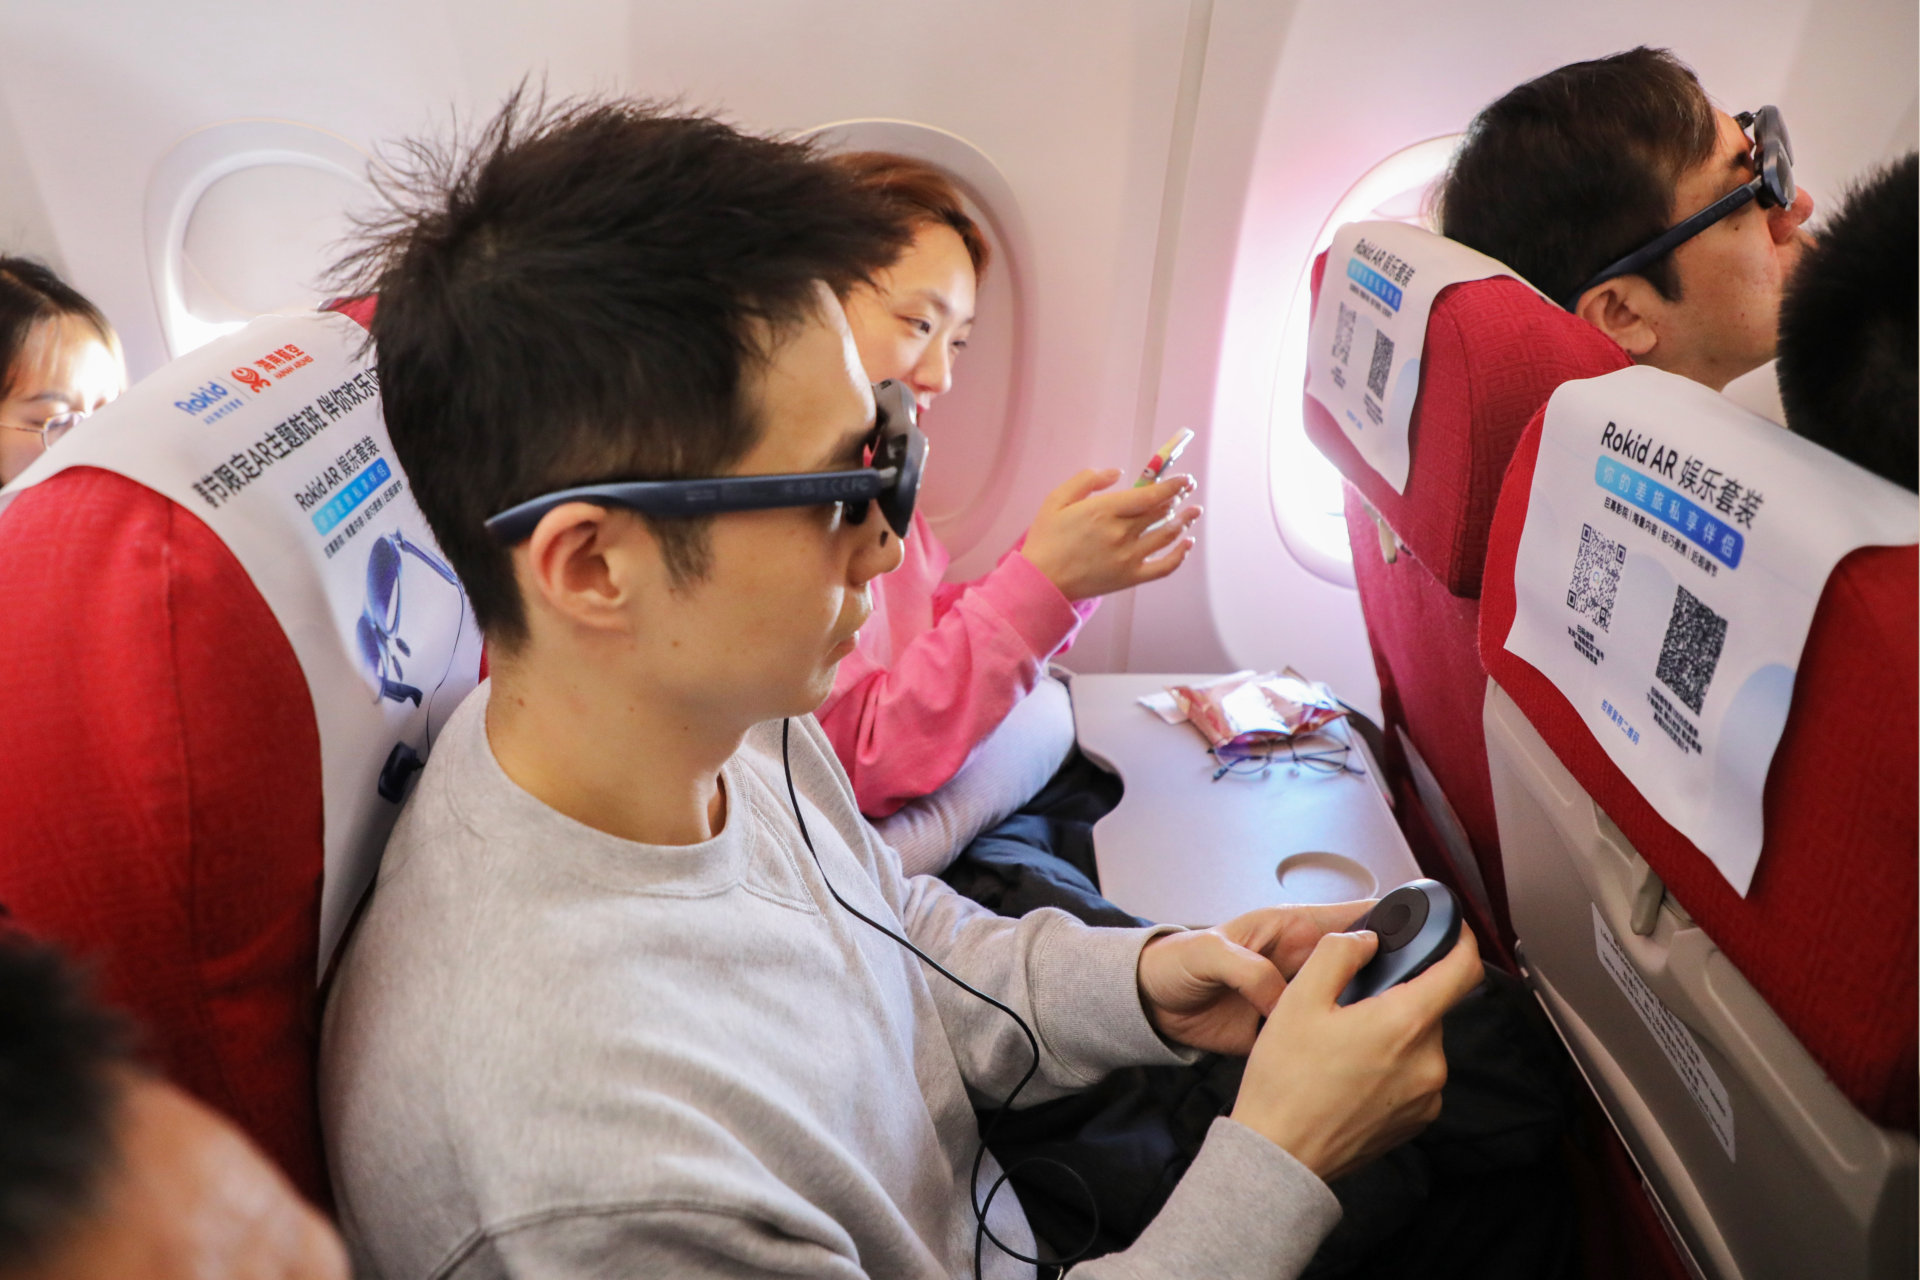 Rokid Max and Rokid Station are shown in use on an Hainan Airline flight.